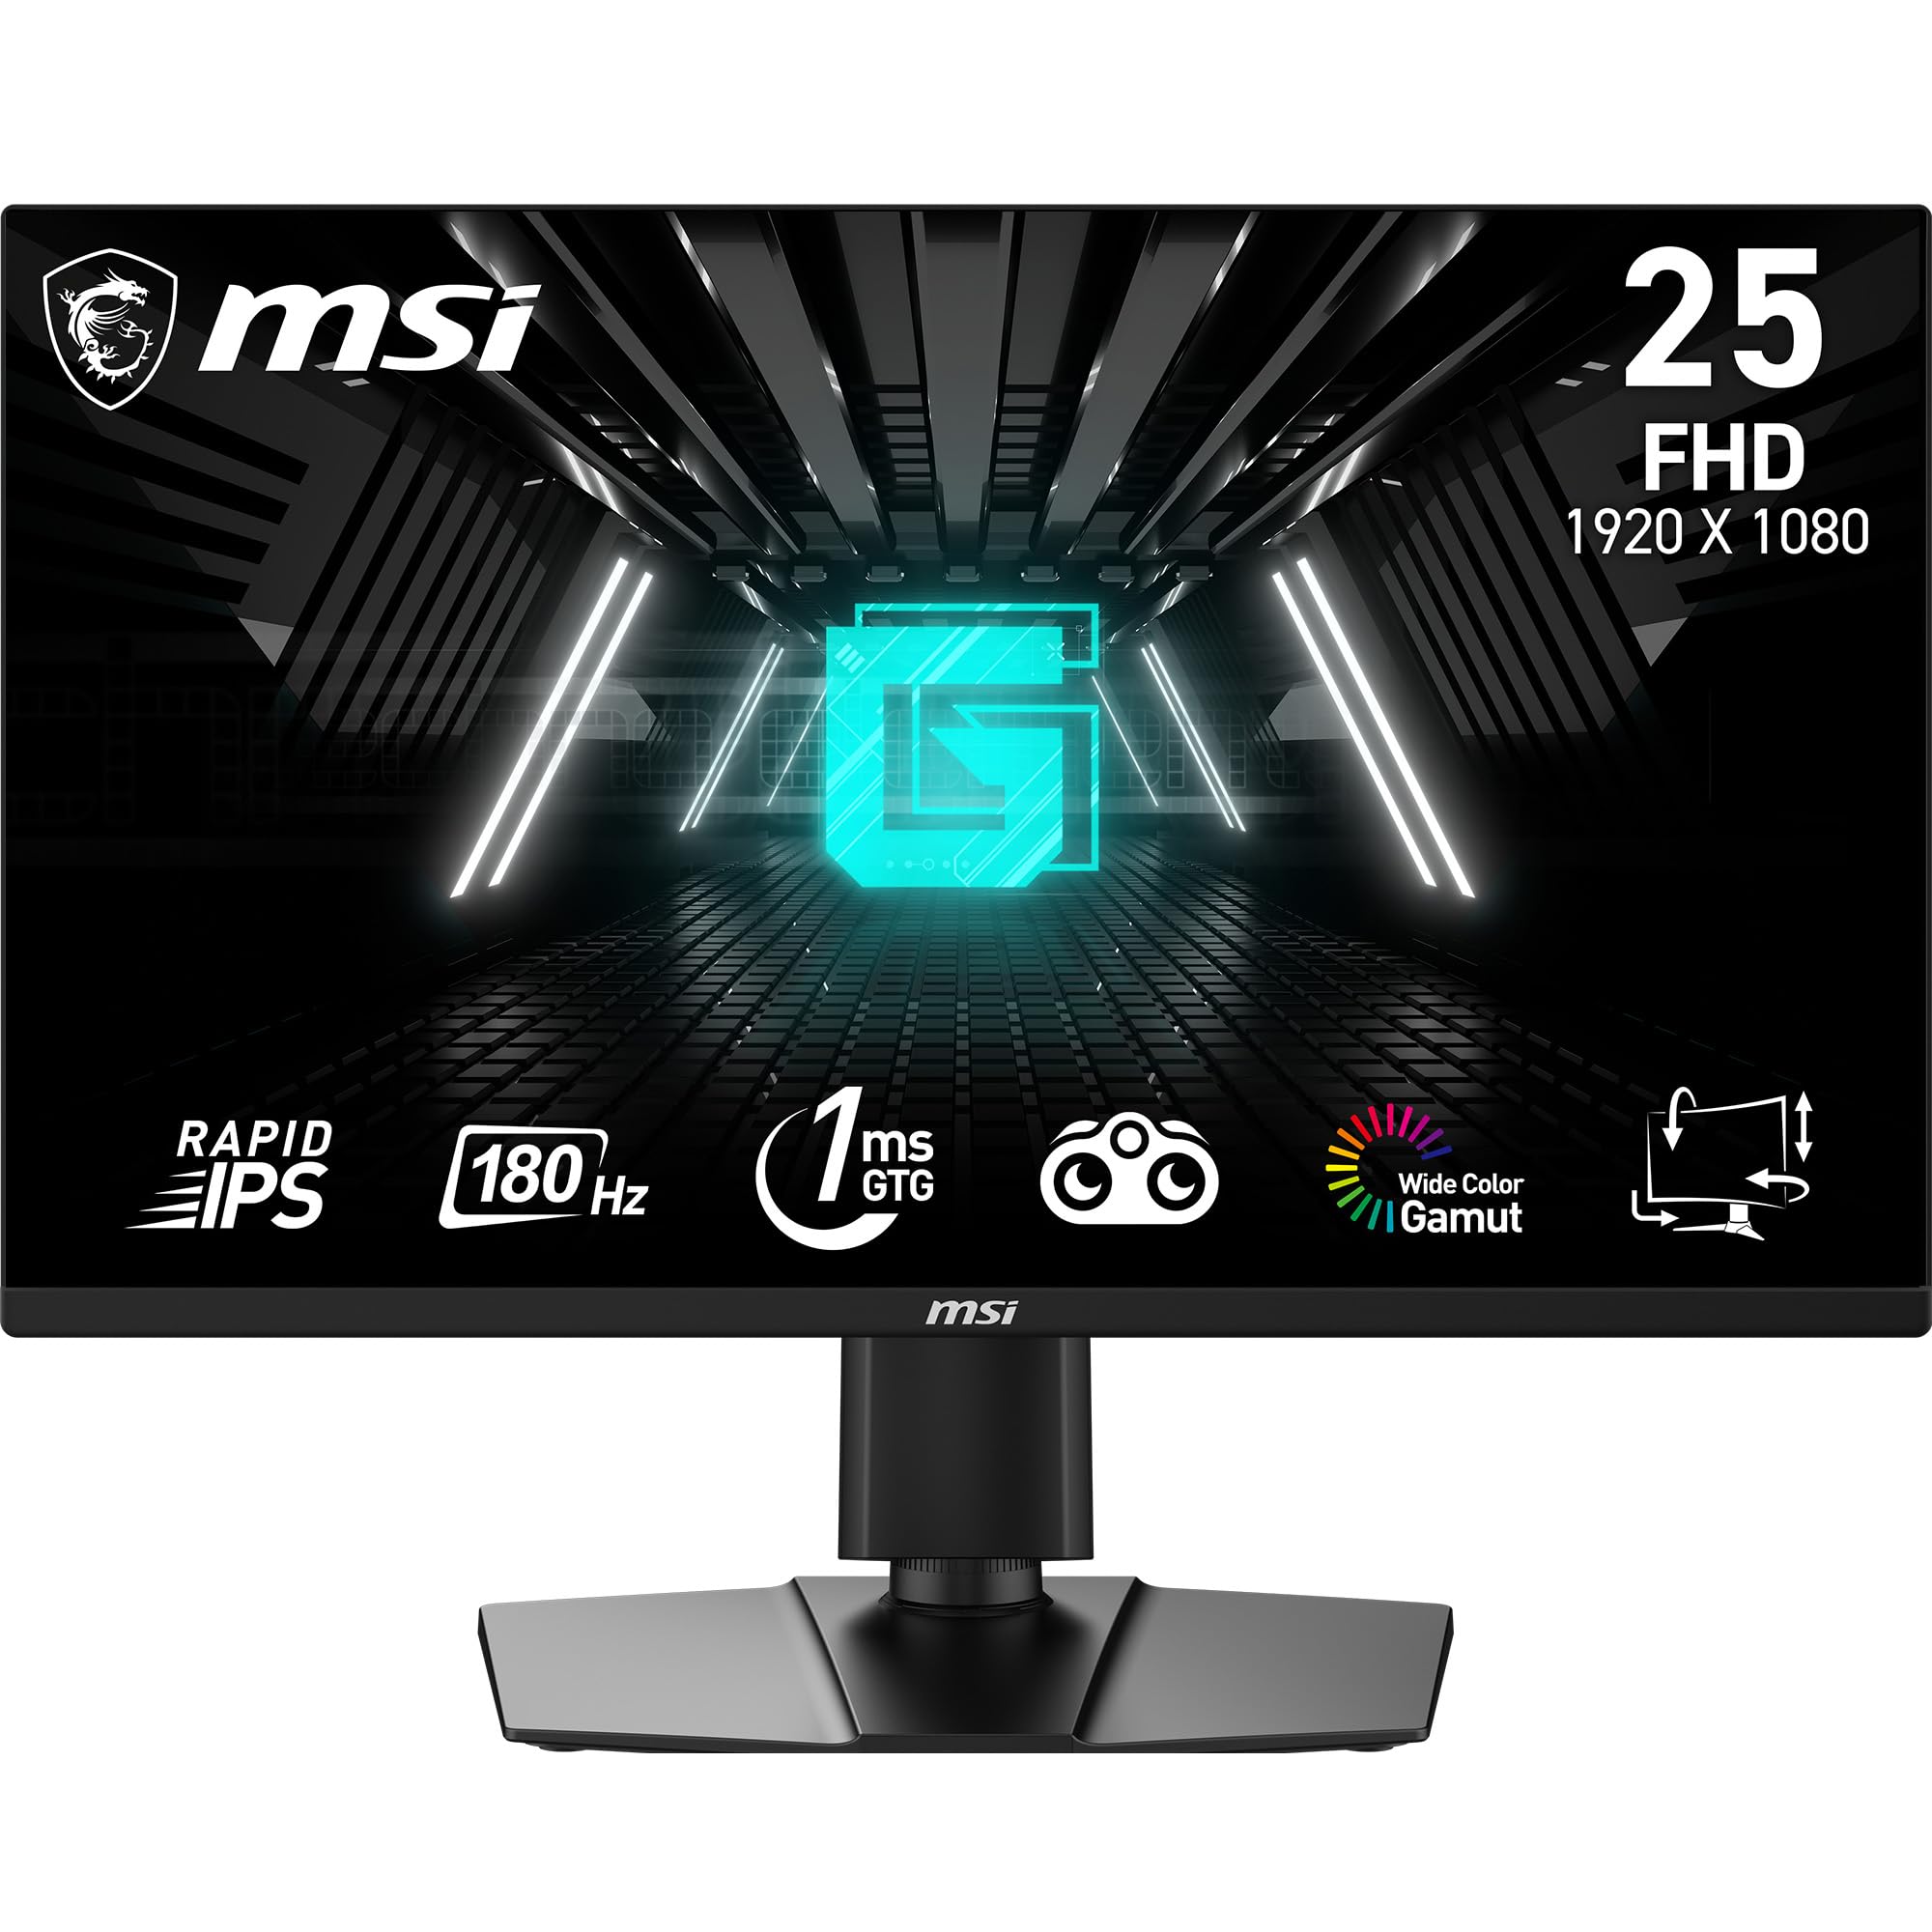 MSI FHD Rapid IPS Gaming Free Sync 1ms 1920 x 1080 180Hz Refresh Rate 25